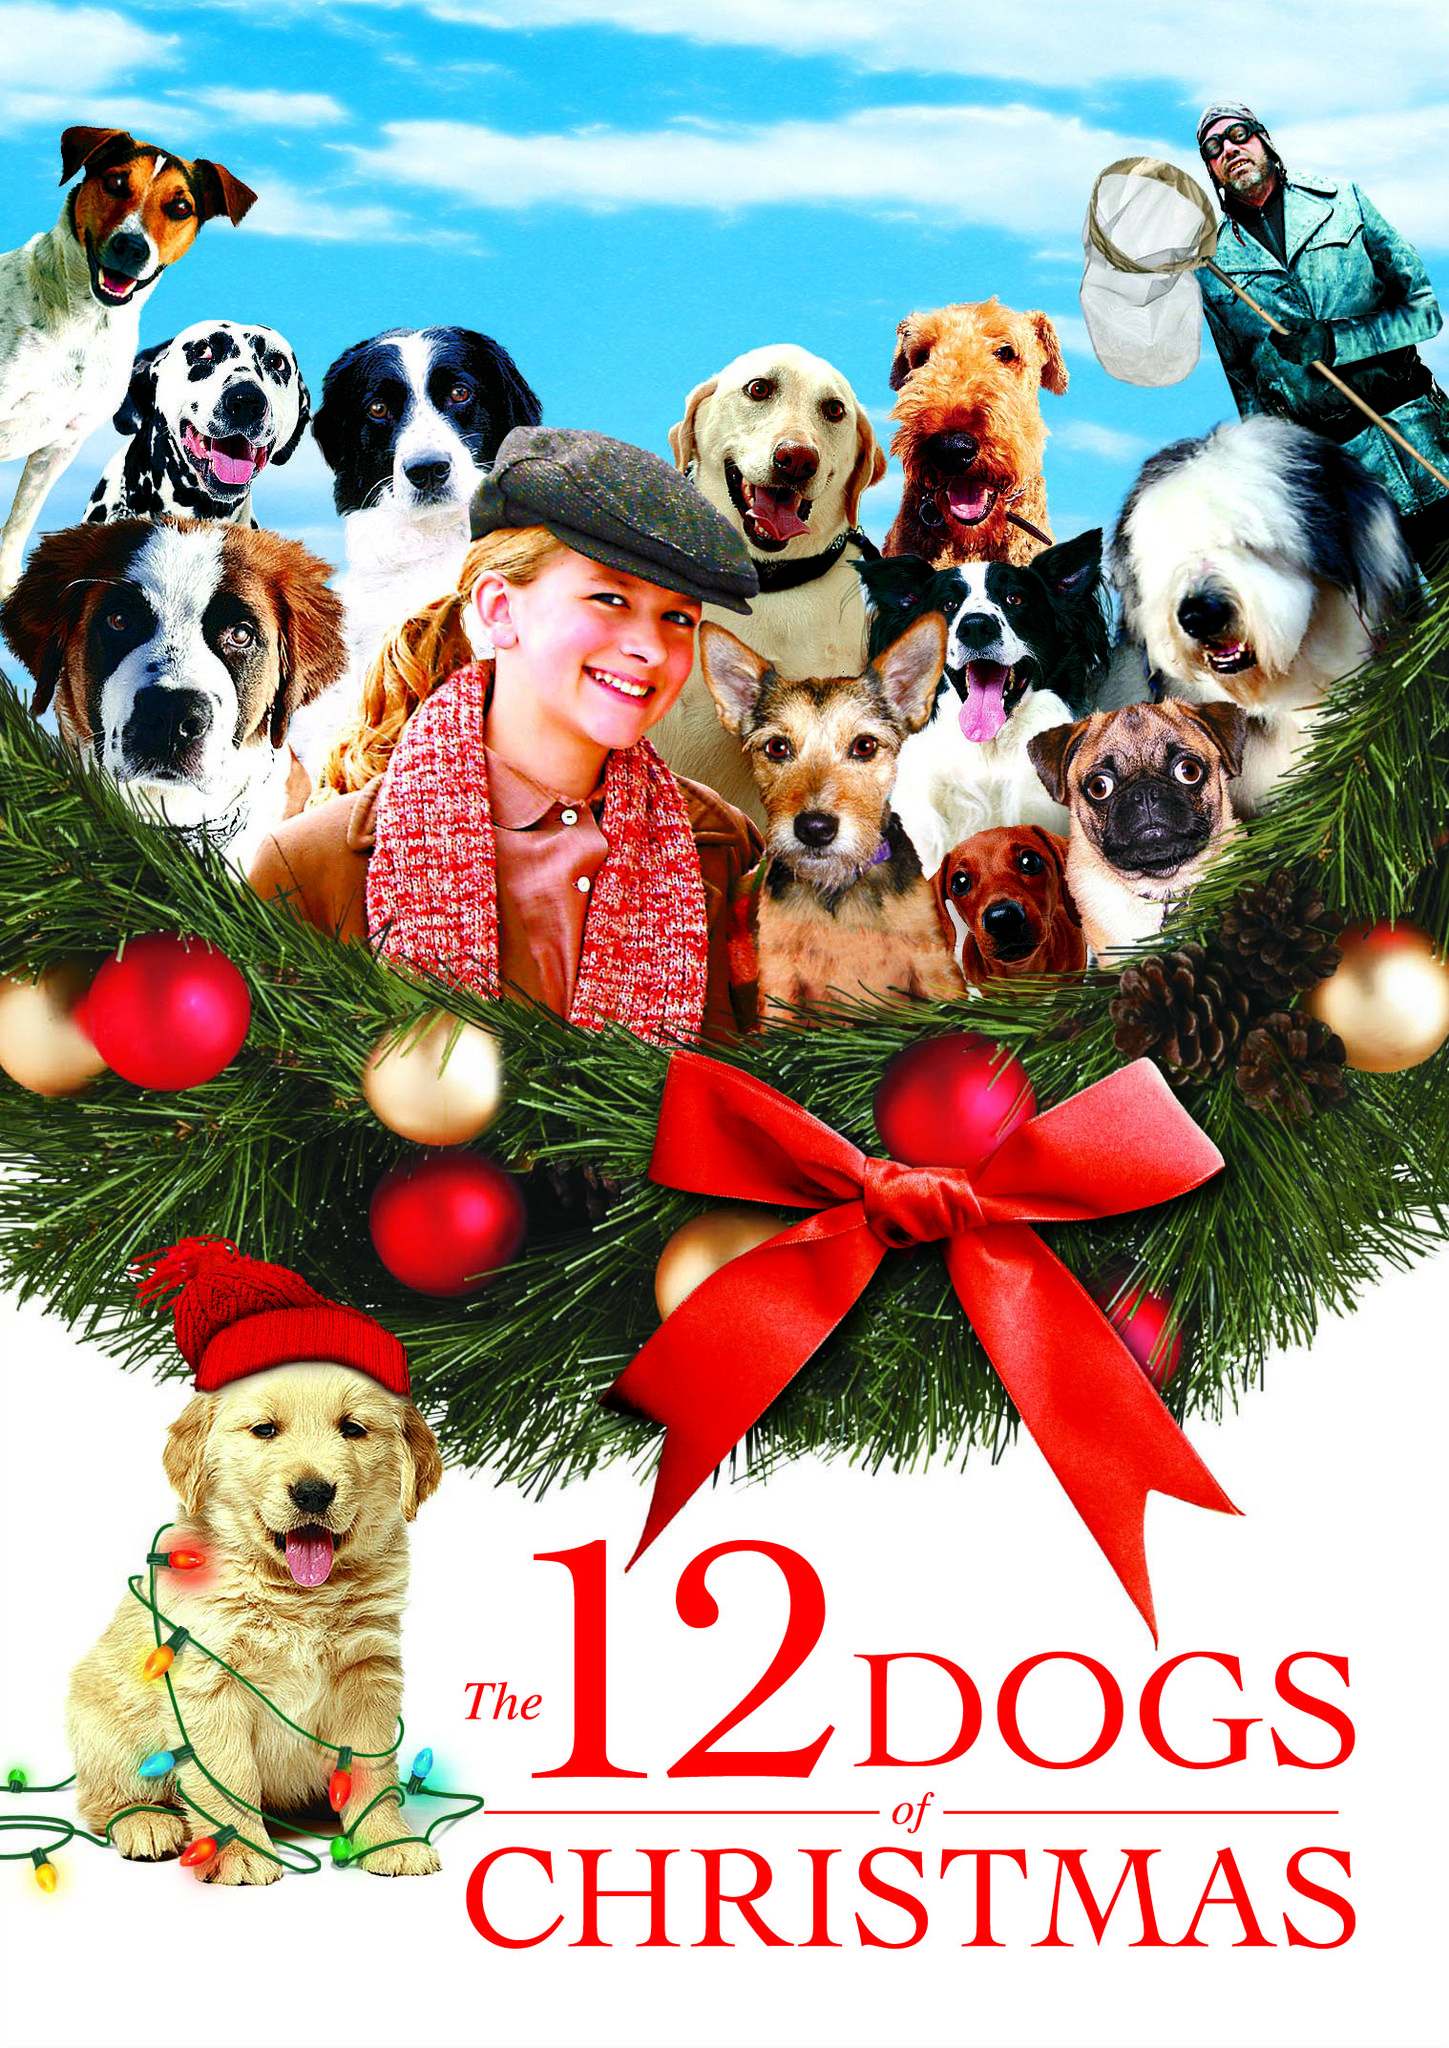 The 12 Dogs of Christmas (Video 2005)